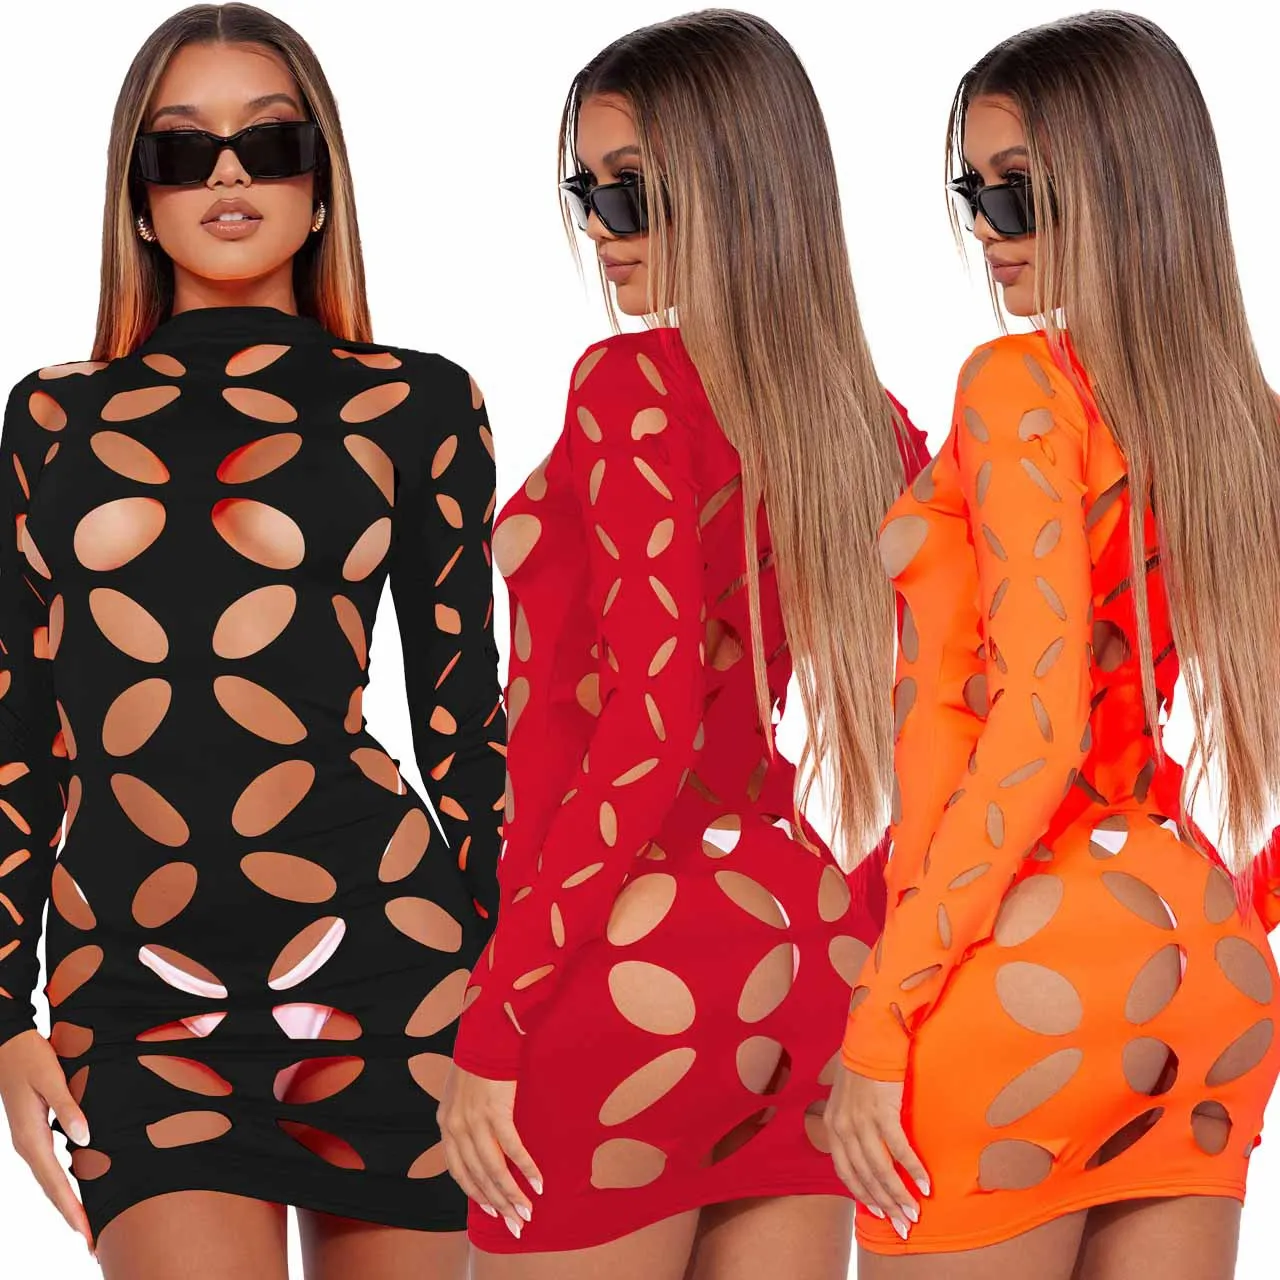 

Sexy See Through Women Bodycon Mini Beach Dress Whole Body Hollow Out Party Club Outfits Stretch Long Sleeve Short Nightdress